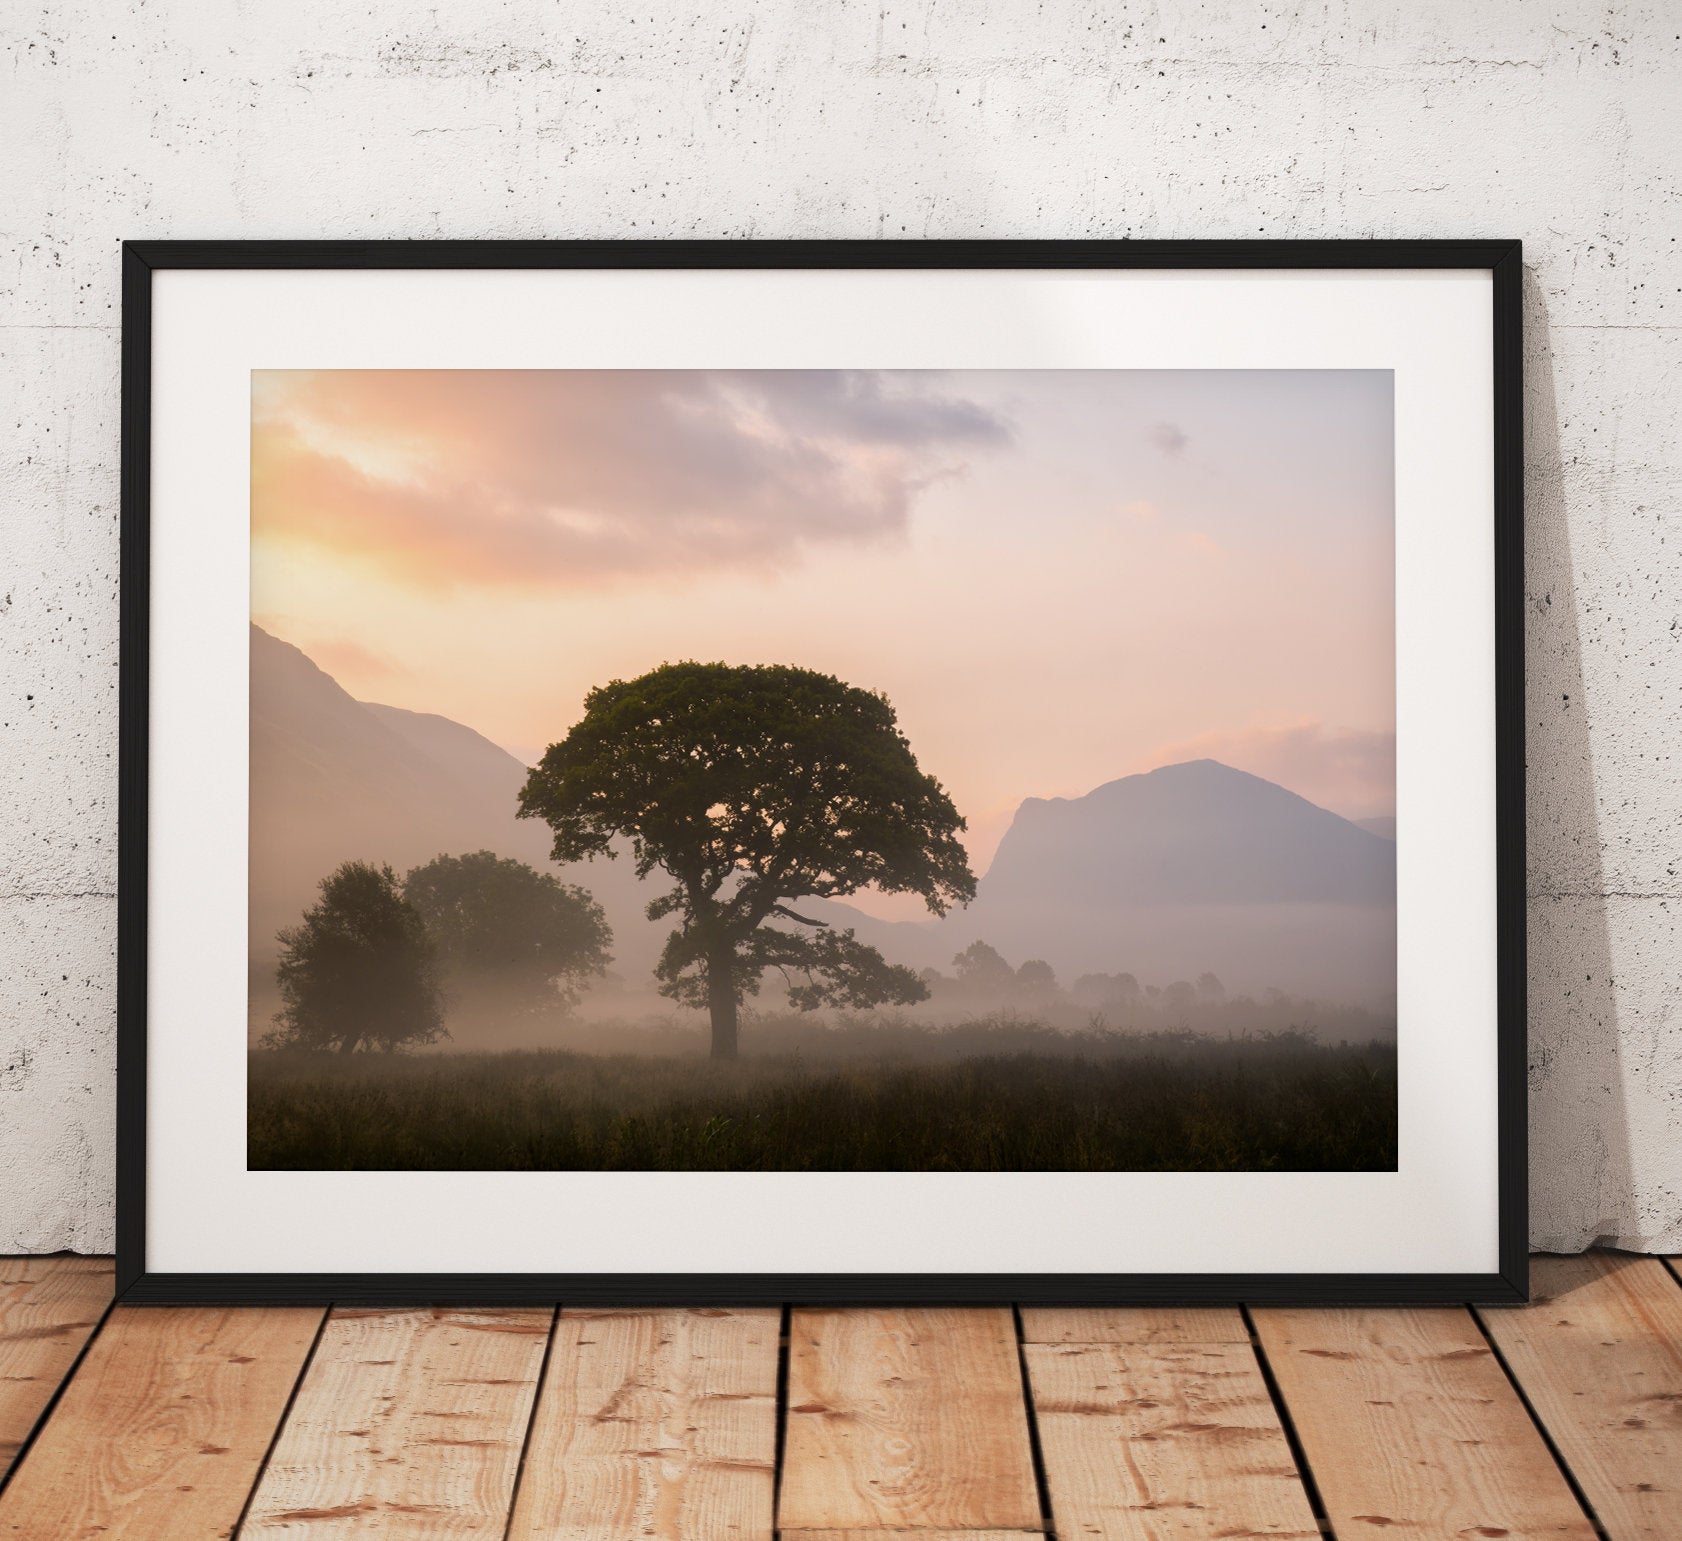 Lake District Landscape Photography showing a very atmospheric misty tree during a sunrise at Crummock water with haystacks mountain. UK